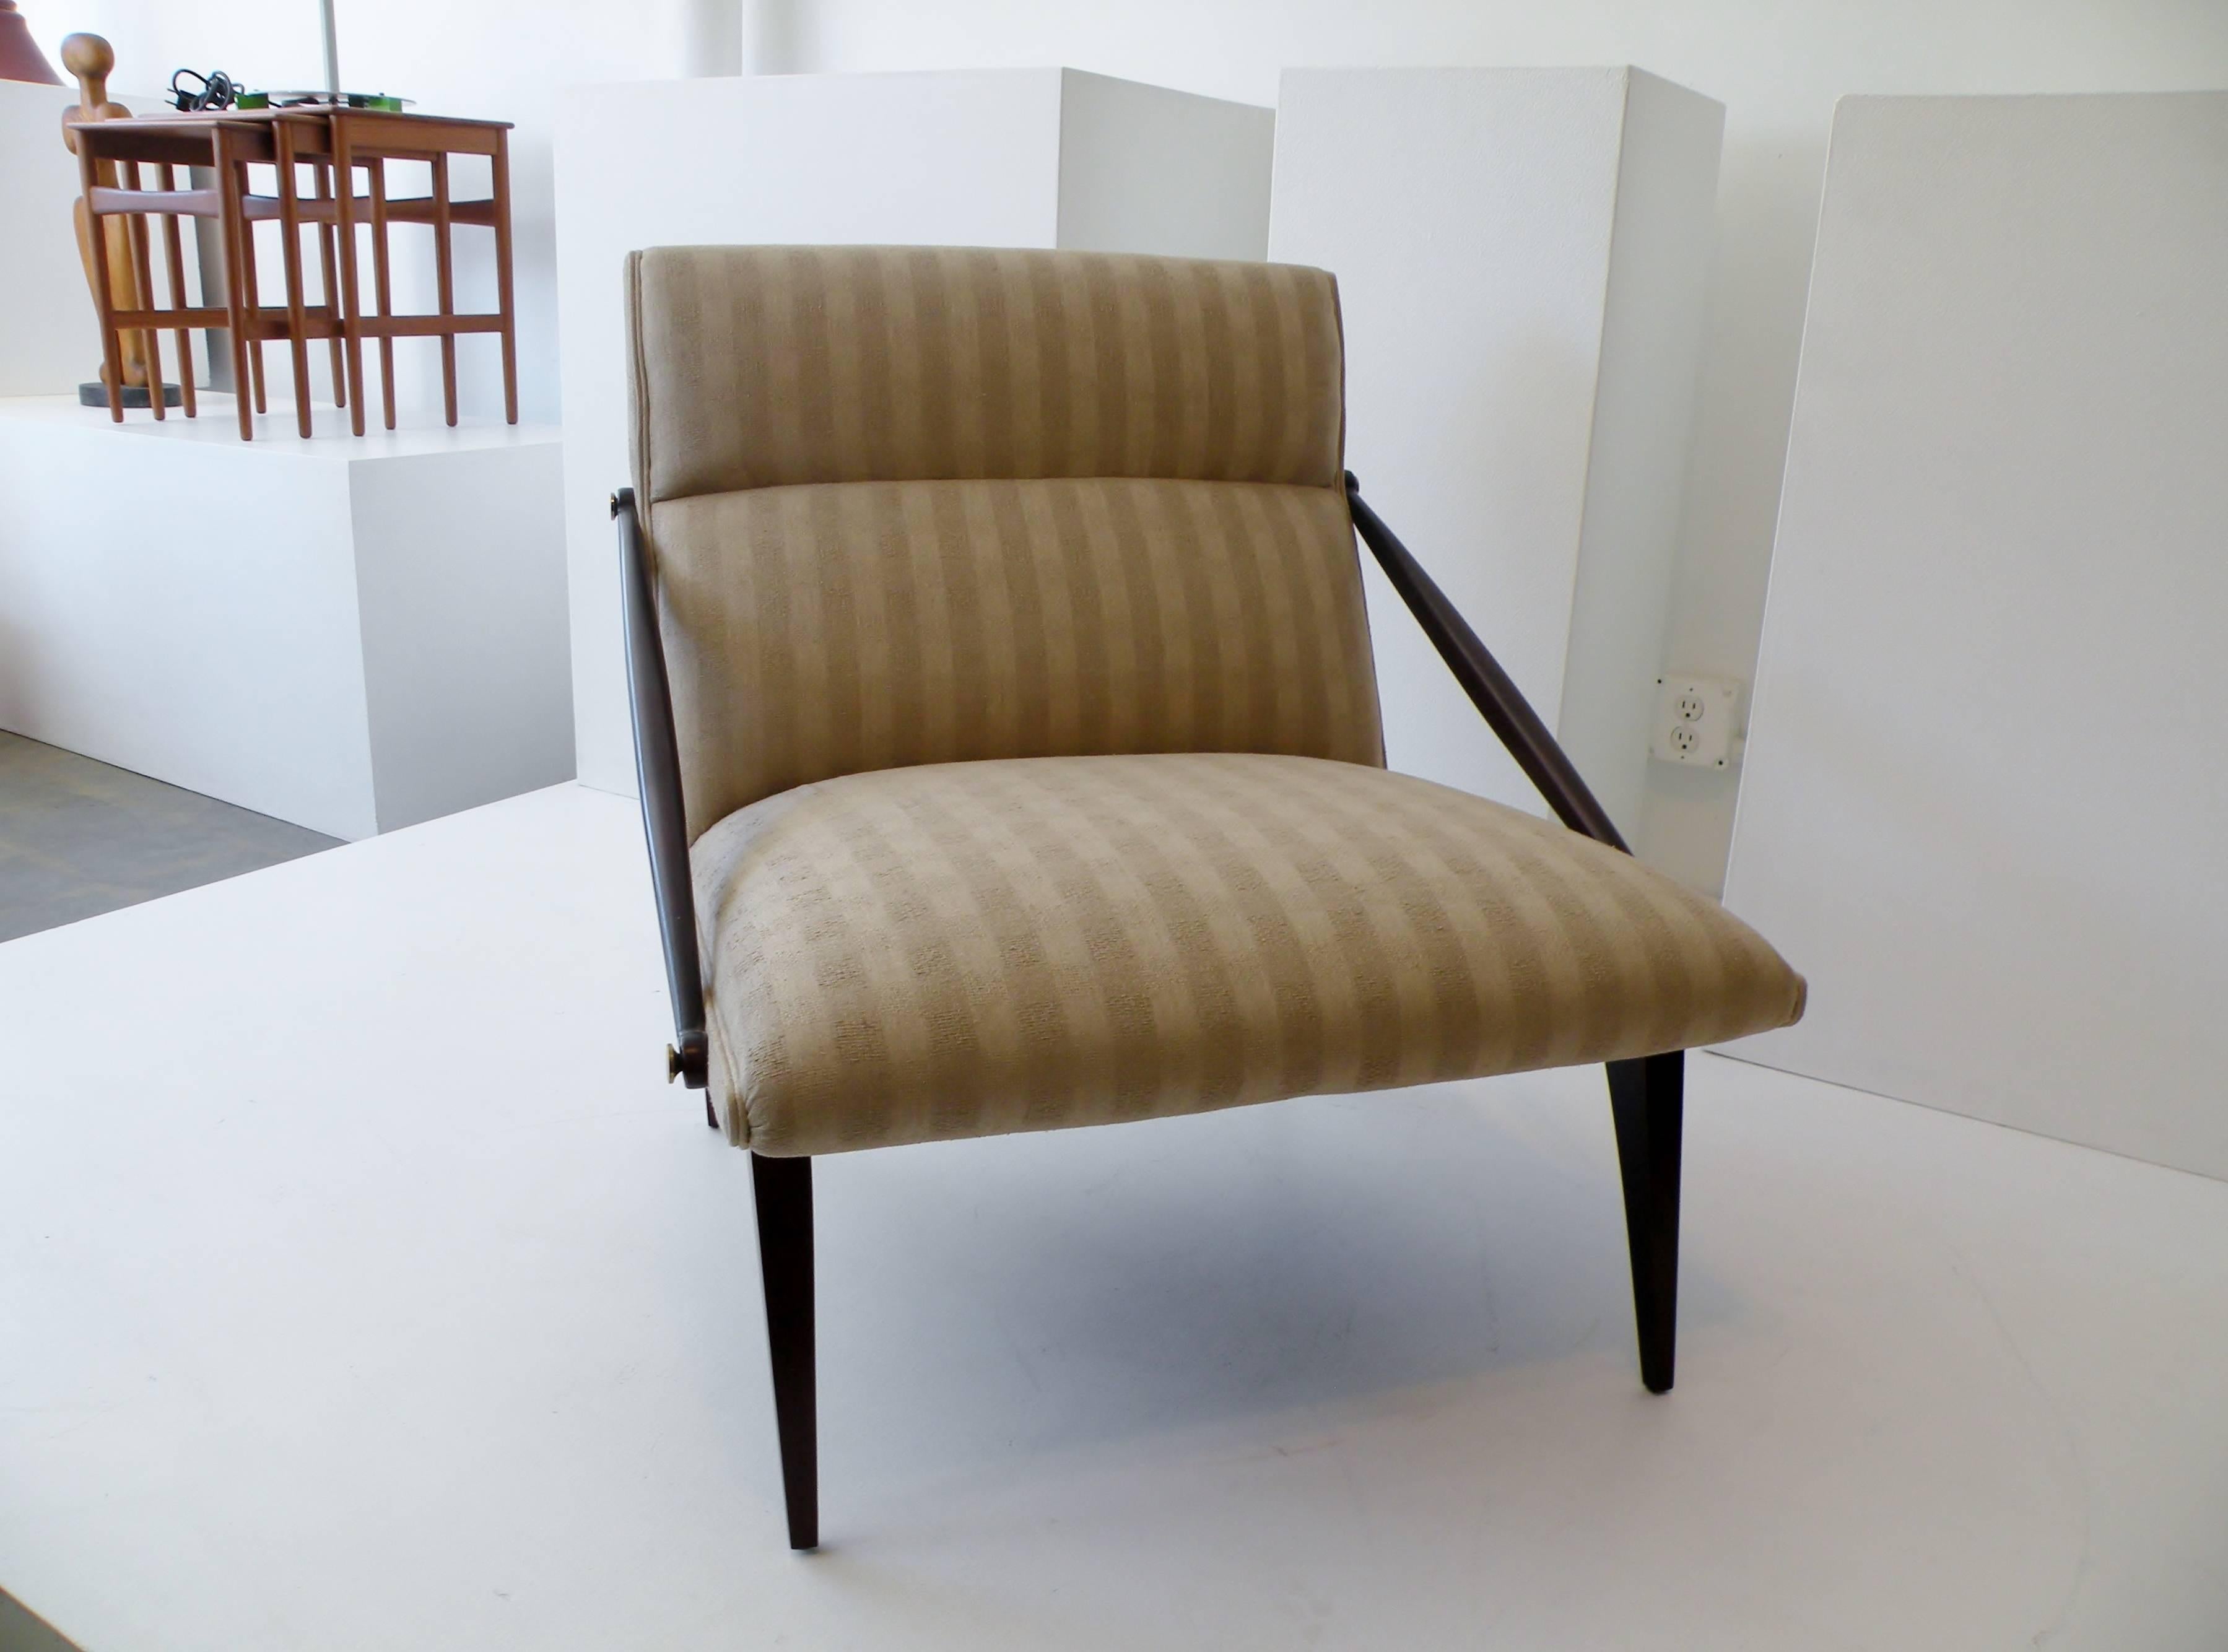 Modern 1950s Gio Ponti Style Cantilevered Lounge Chair Made by Singer & Sons